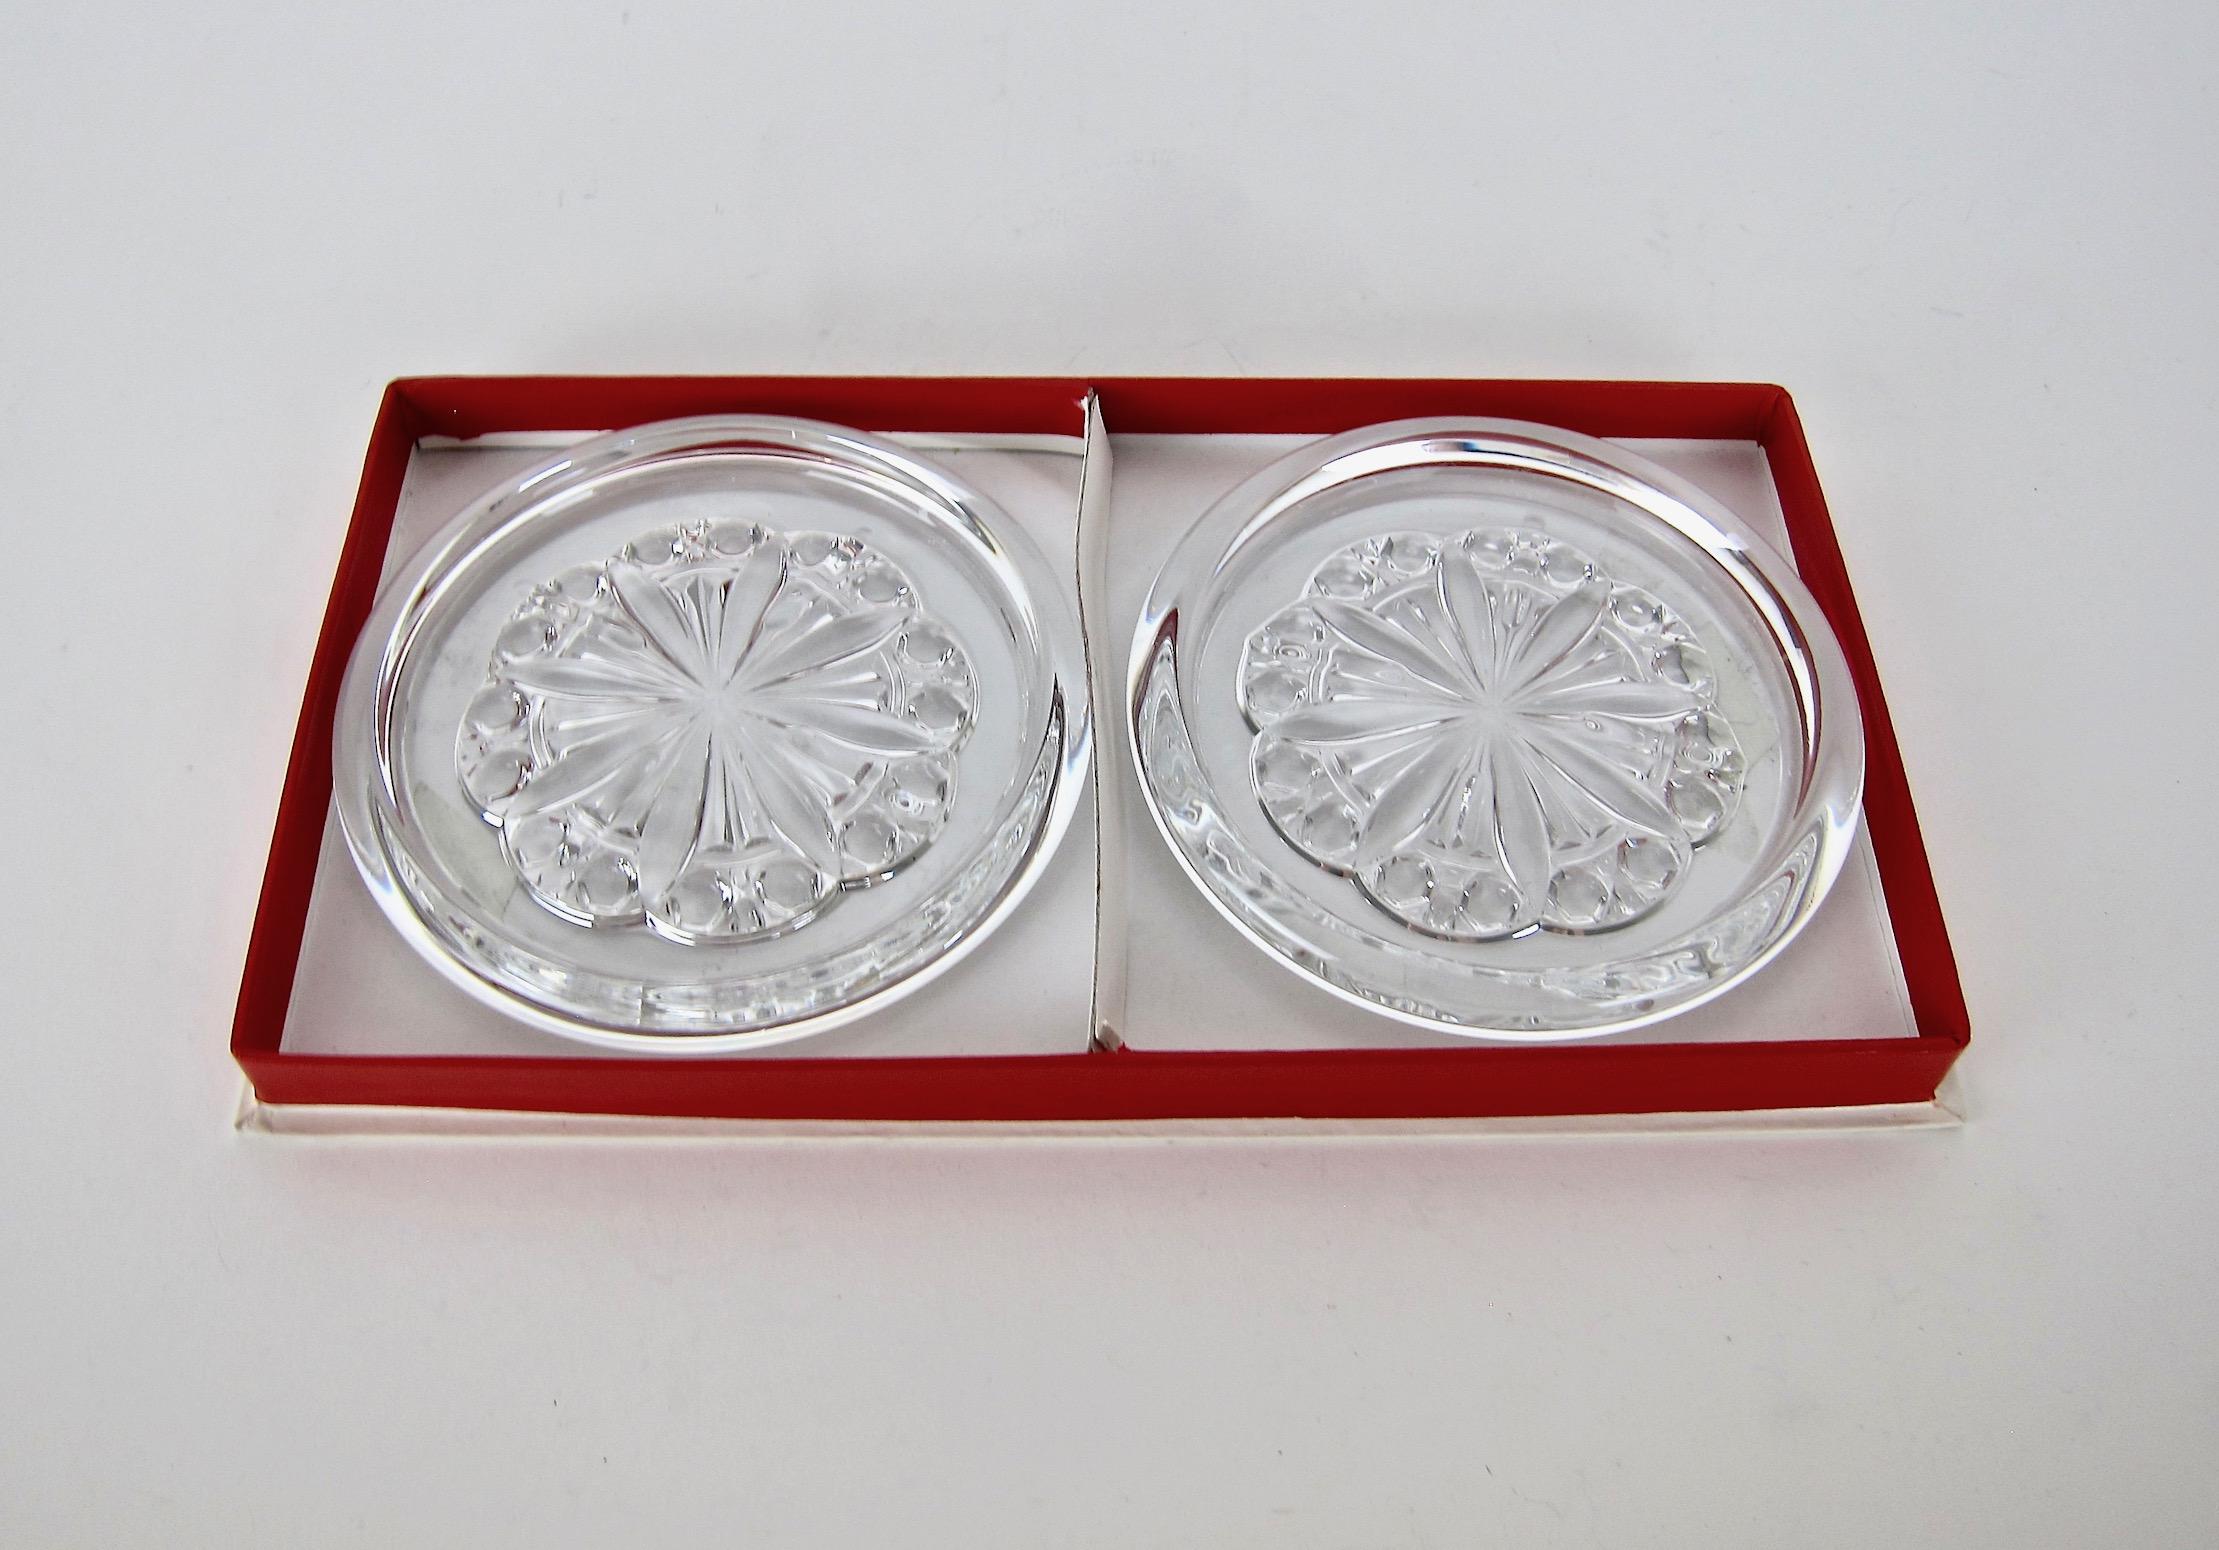 A boxed pair of French Baccarat crystal bottle coasters from the discontinued Rosace line. Each round and colorless crystal coaster is designed to accommodate a large, magnum size bottle of wine or champagne but can also be used as a decanter stand